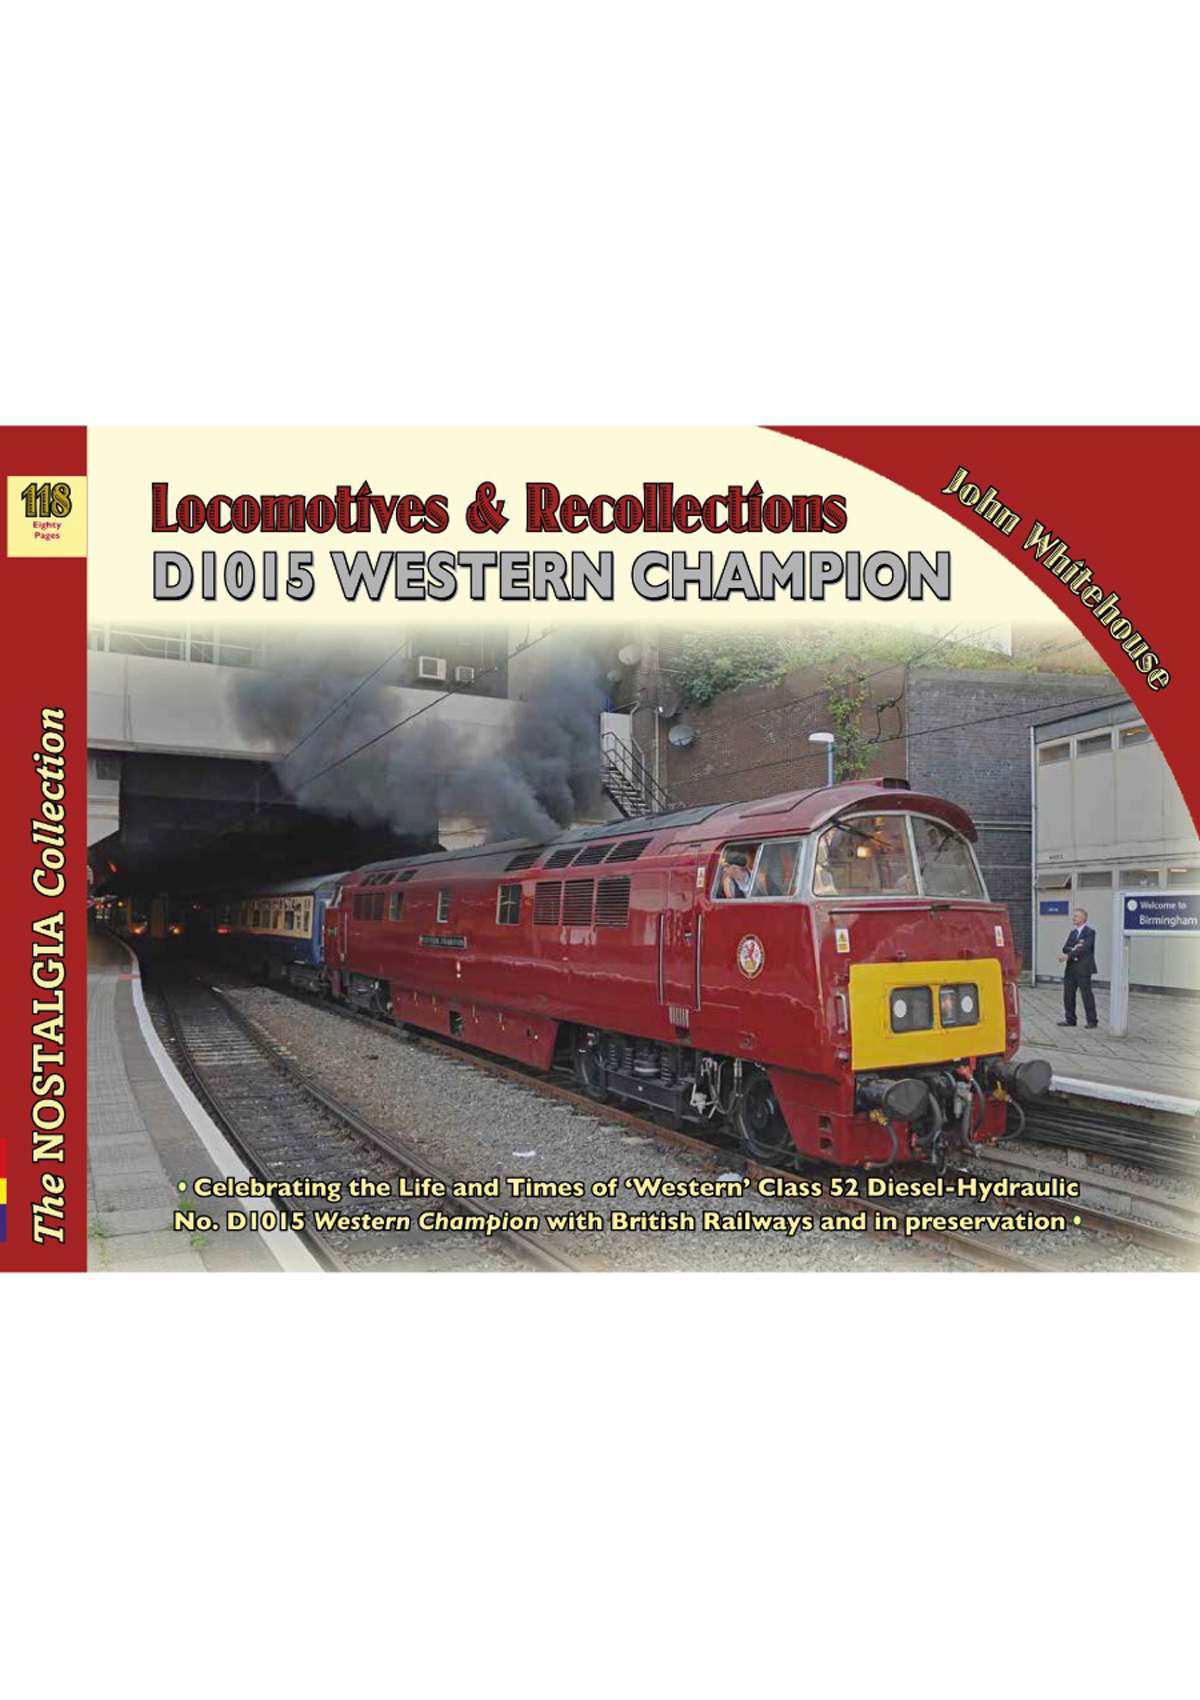 Book - Locomotives & Recollections D1015 Western Champion